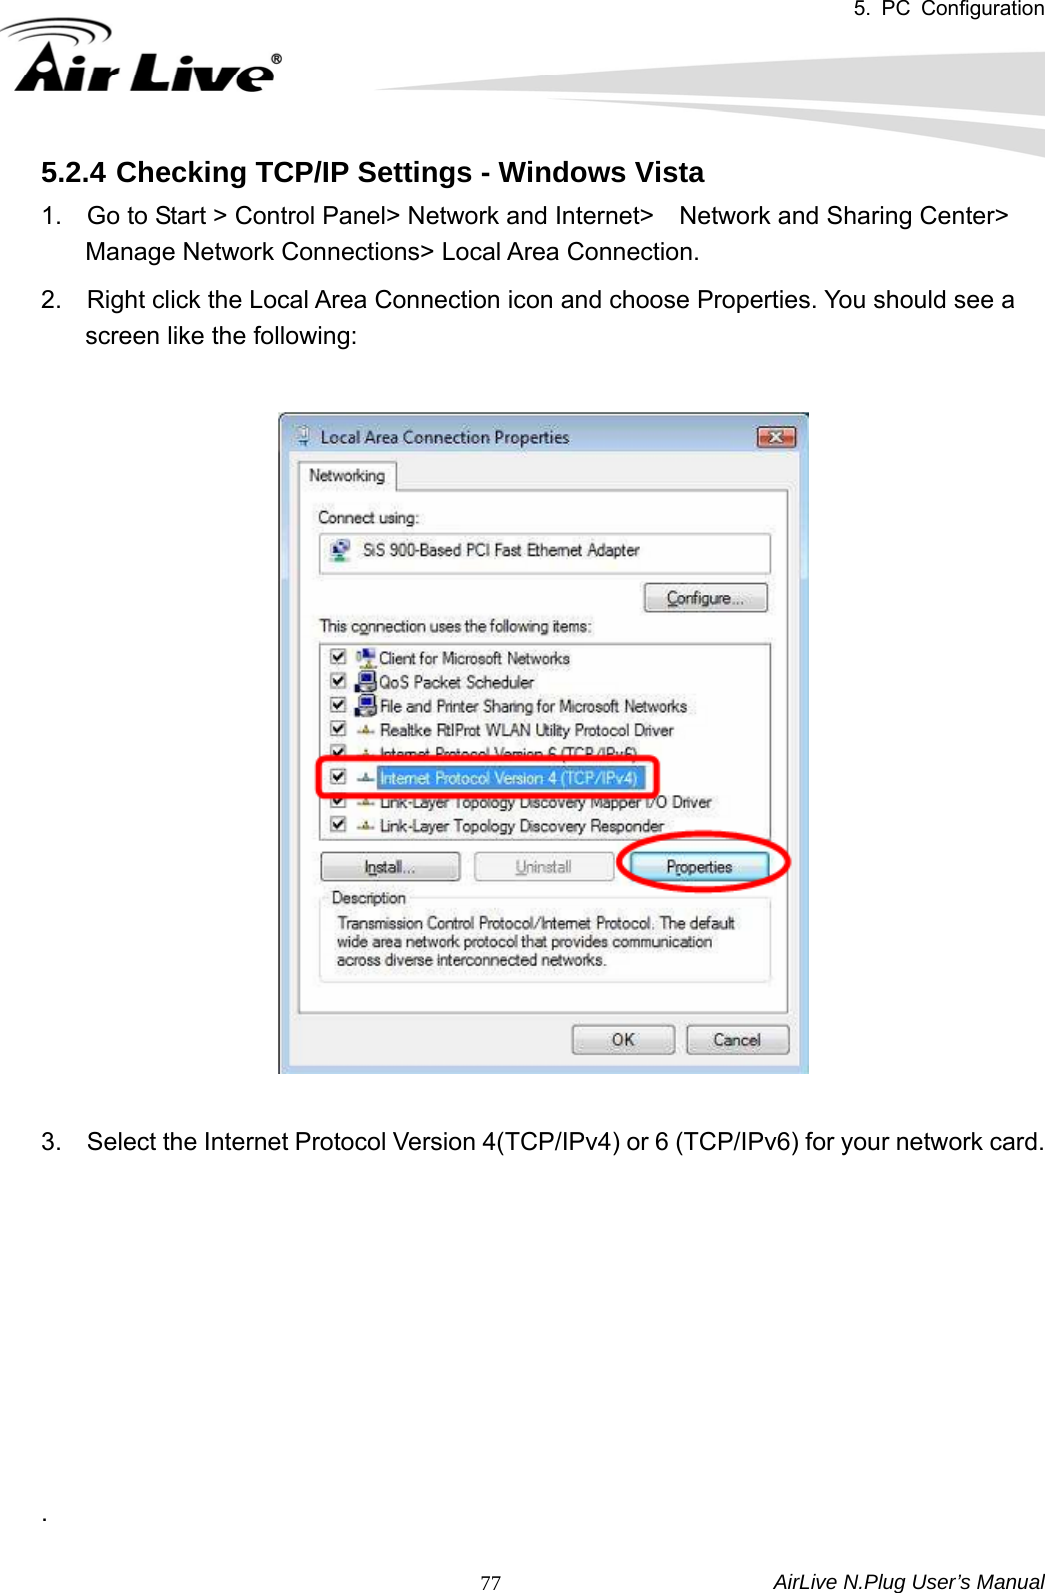 5. PC Configuration  AirLive N.Plug User’s Manual  775.2.4 Checking TCP/IP Settings - Windows Vista 1.    Go to Start &gt; Control Panel&gt; Network and Internet&gt;    Network and Sharing Center&gt; Manage Network Connections&gt; Local Area Connection.   2.    Right click the Local Area Connection icon and choose Properties. You should see a screen like the following:       3.    Select the Internet Protocol Version 4(TCP/IPv4) or 6 (TCP/IPv6) for your network card.           .  